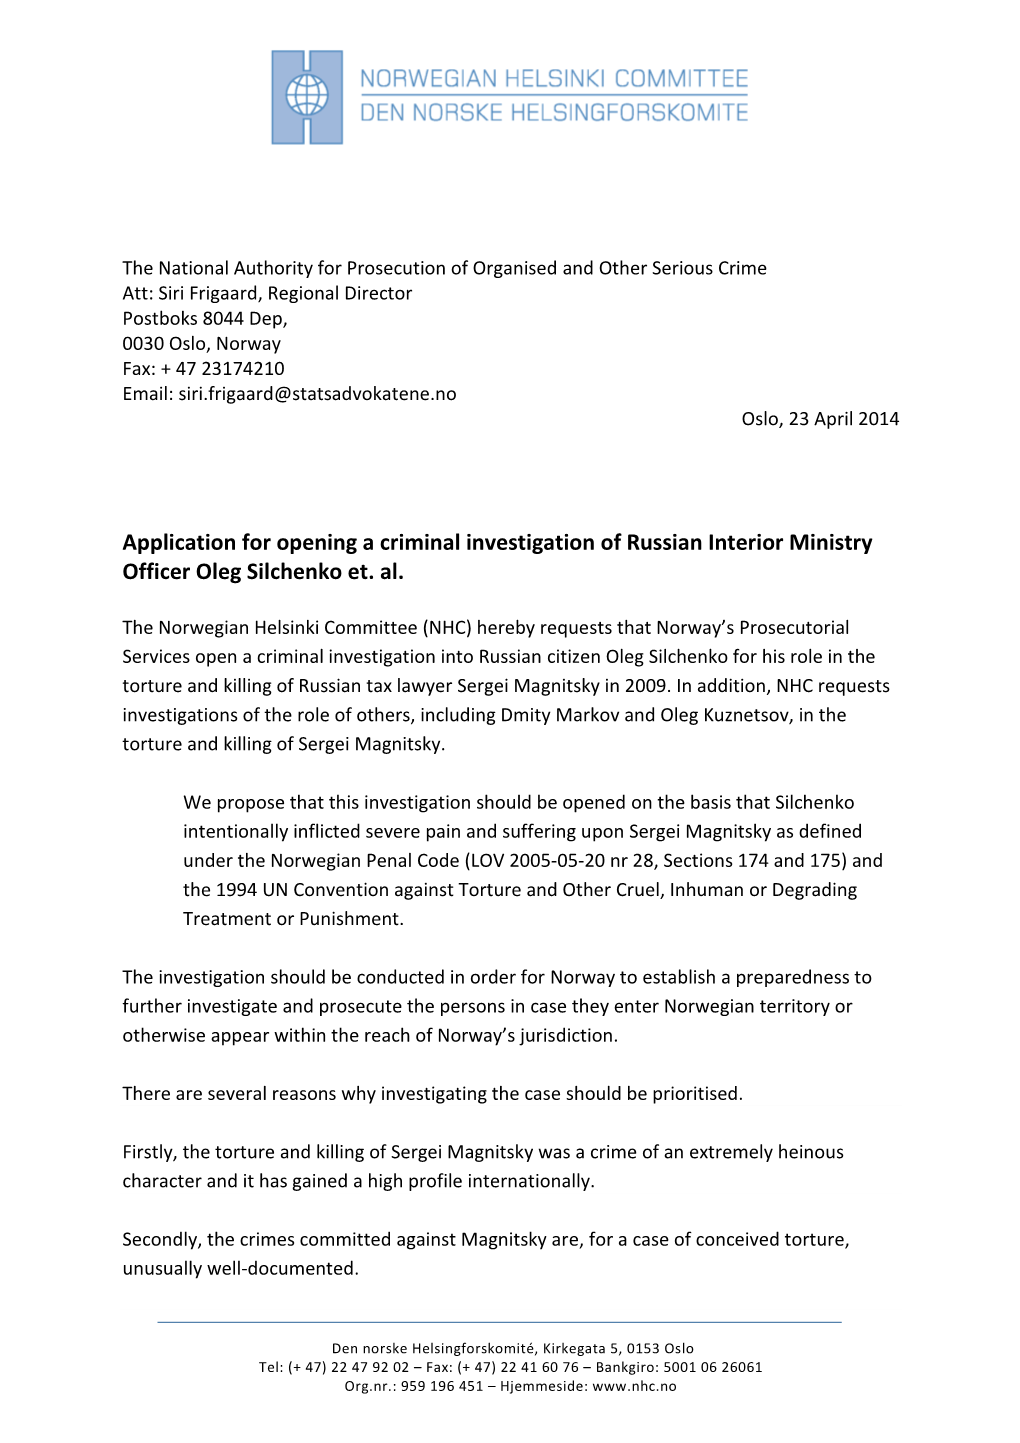 Application for Opening a Criminal Investigation of Russian Interior Ministry Officer Oleg Silchenko Et